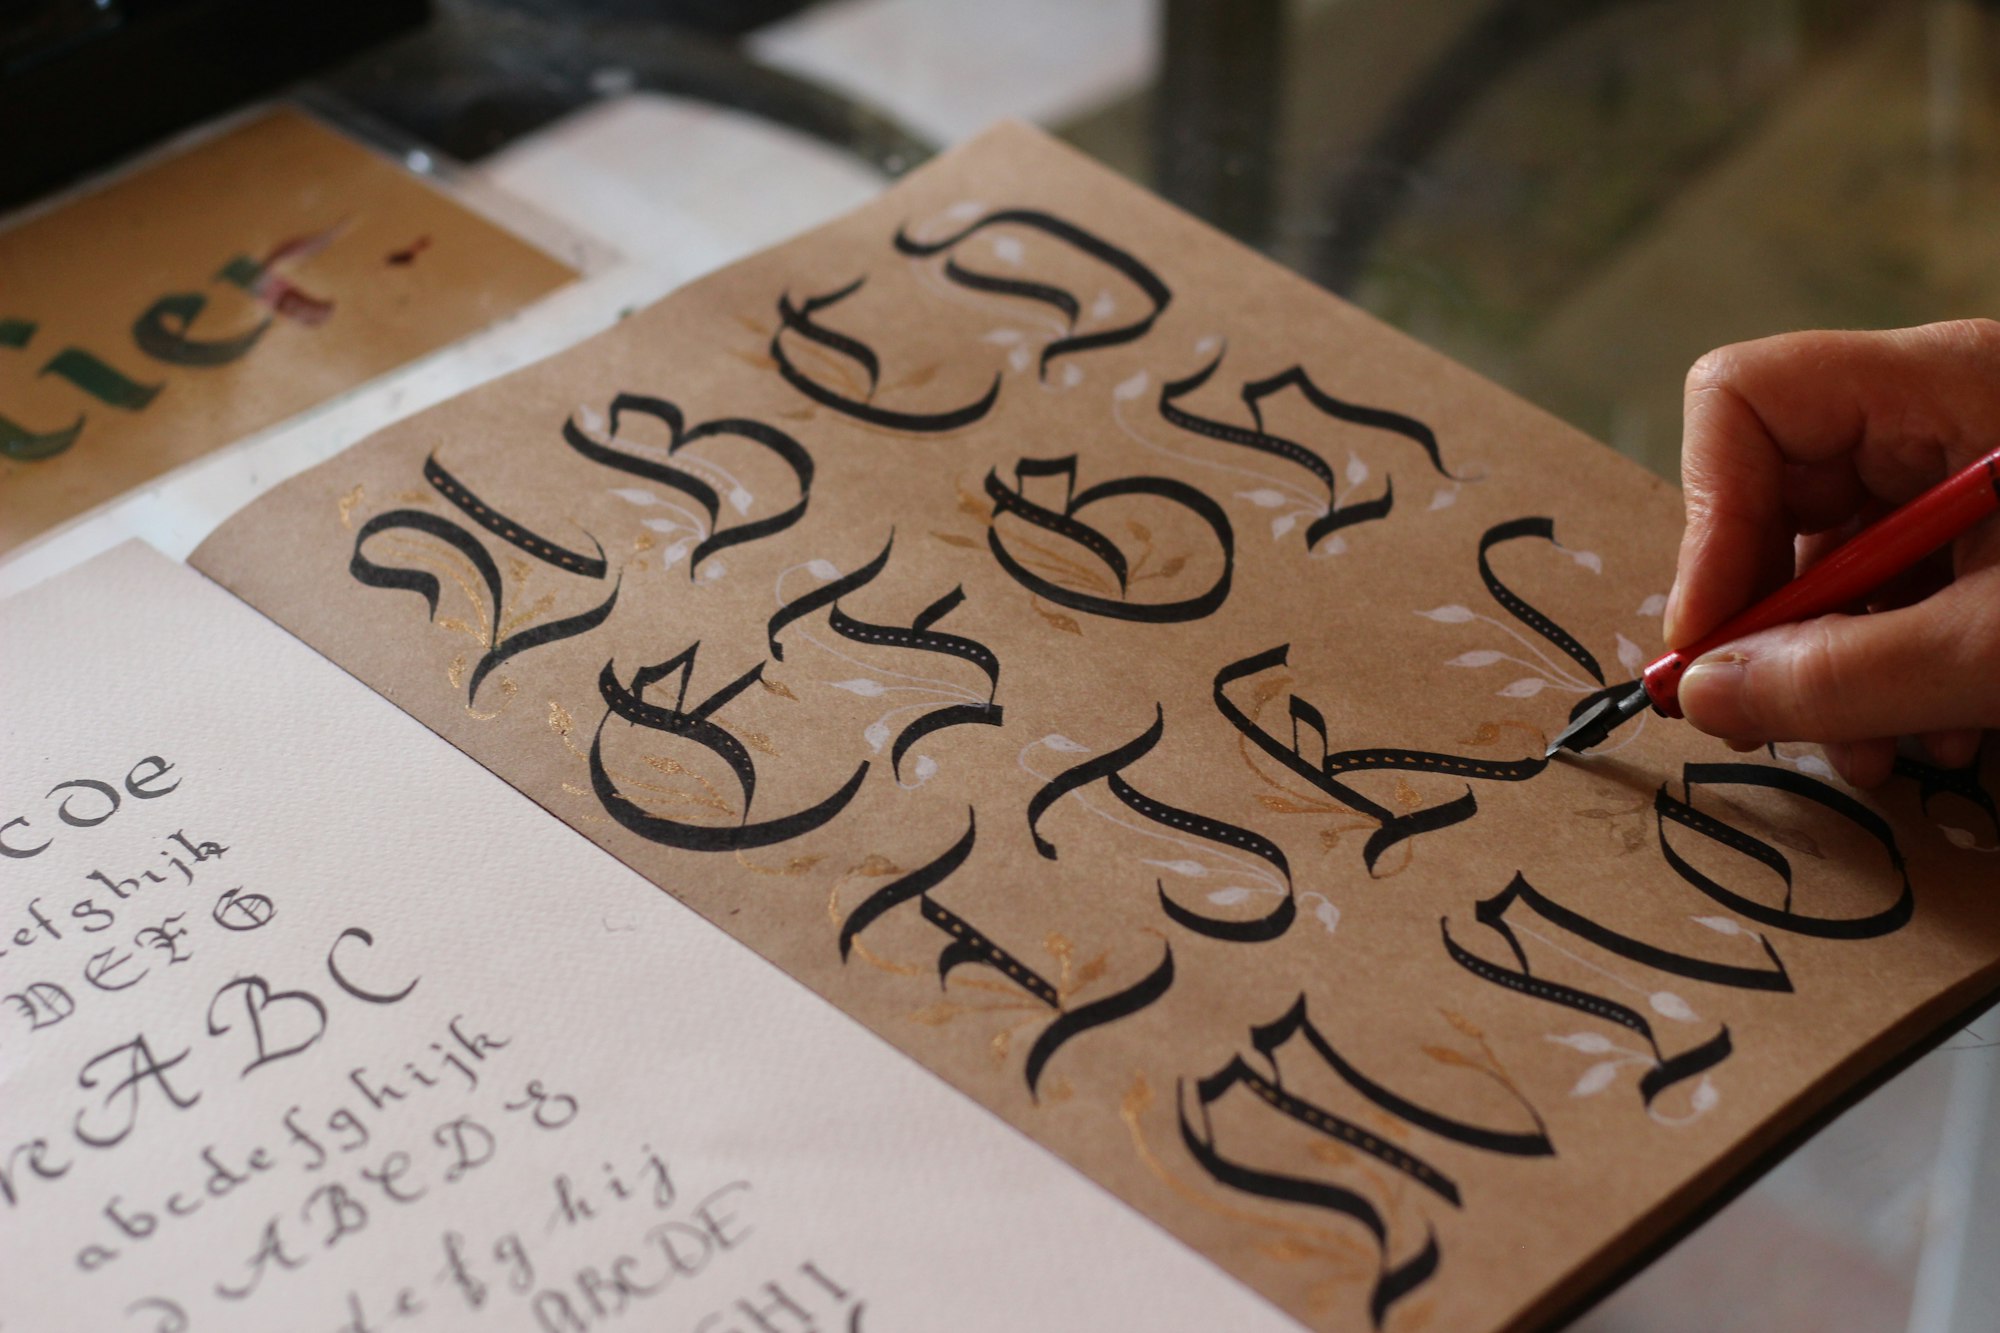 How to Learn Calligraphy